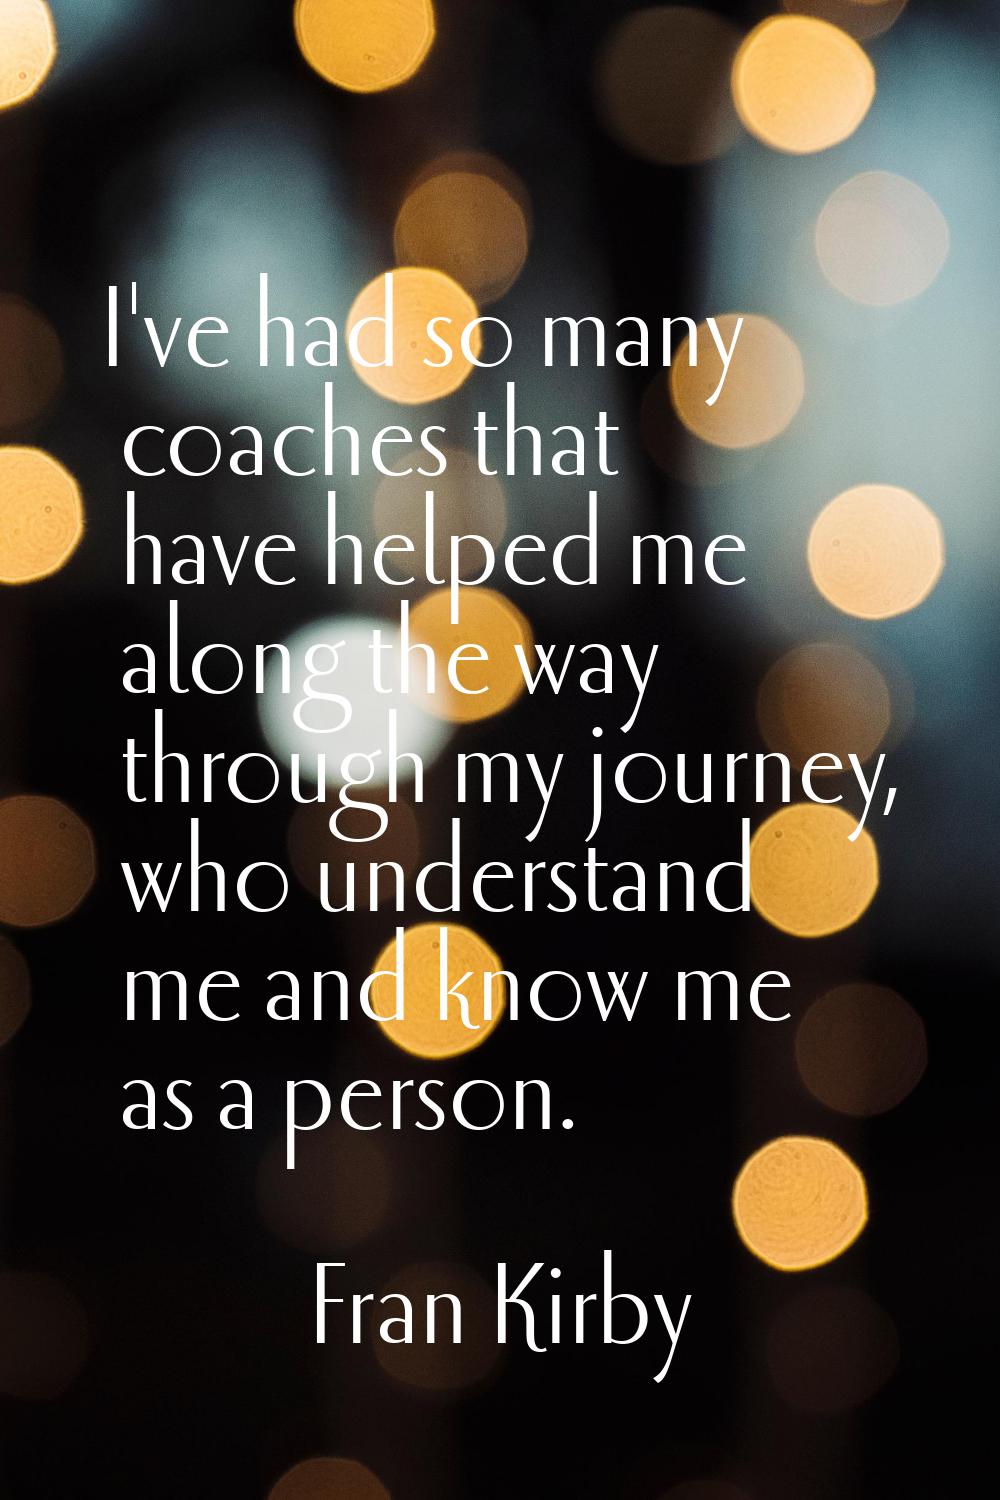 I've had so many coaches that have helped me along the way through my journey, who understand me an